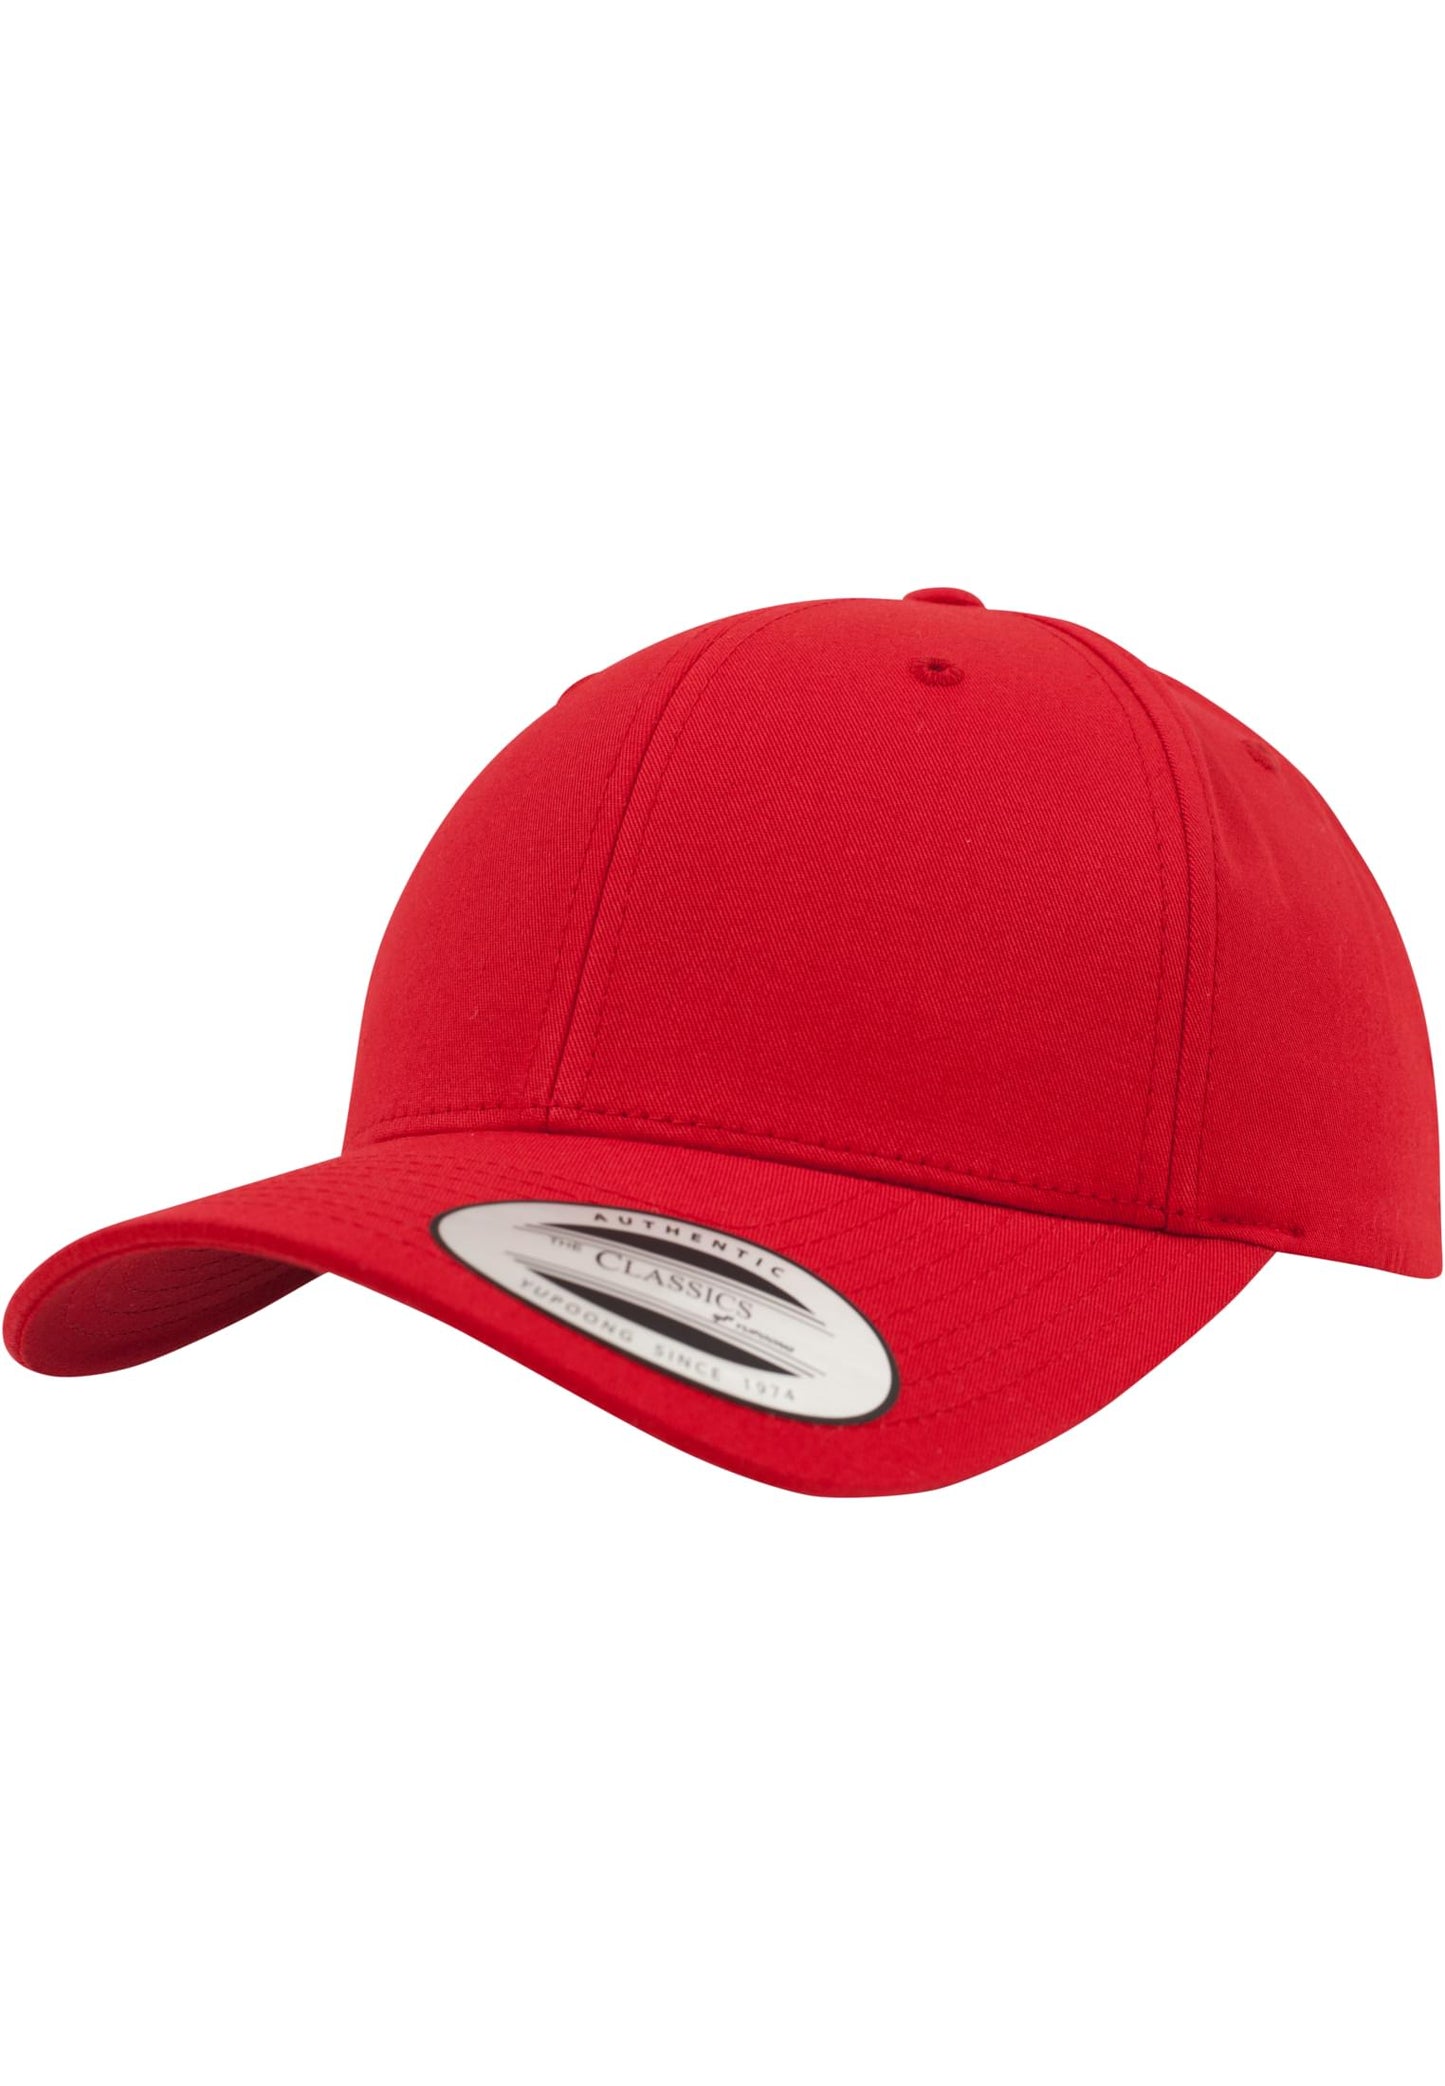 Yupoong Curved Classic Snapback Cap Unisex